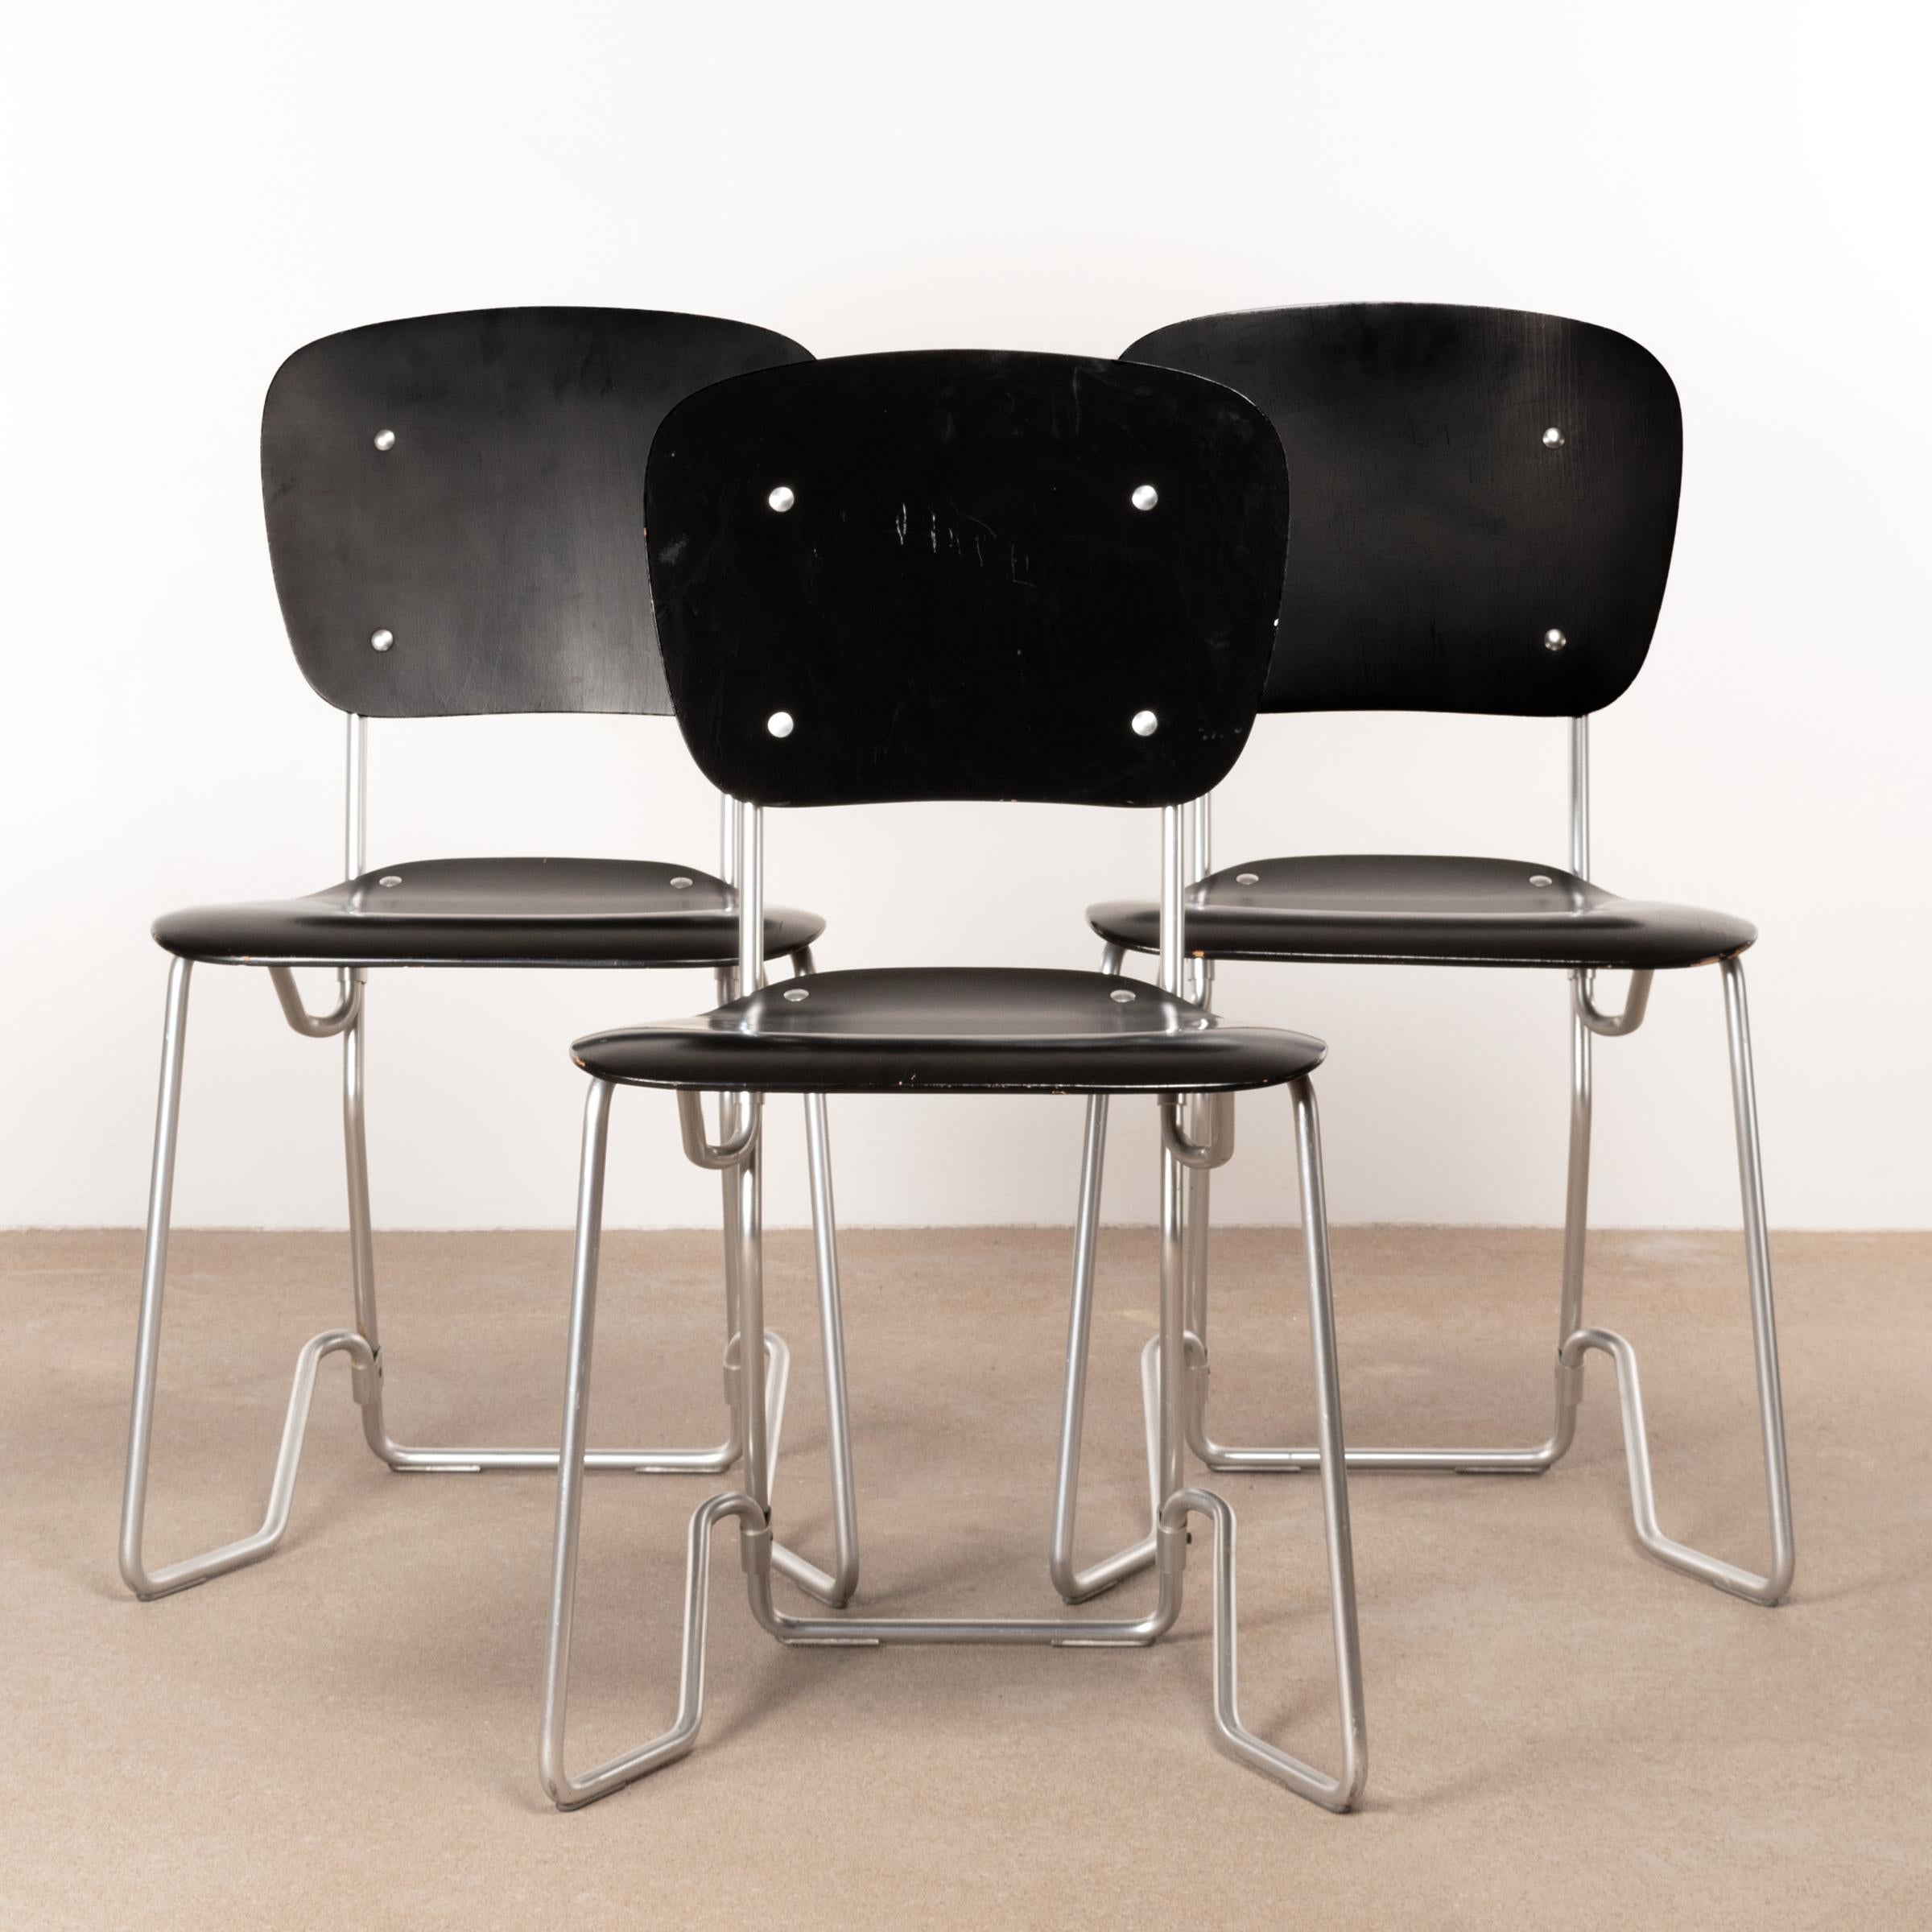 Armin Wirth Early Folding Stacking Chair in Black Plywood / Aluminum for Aluflex 1